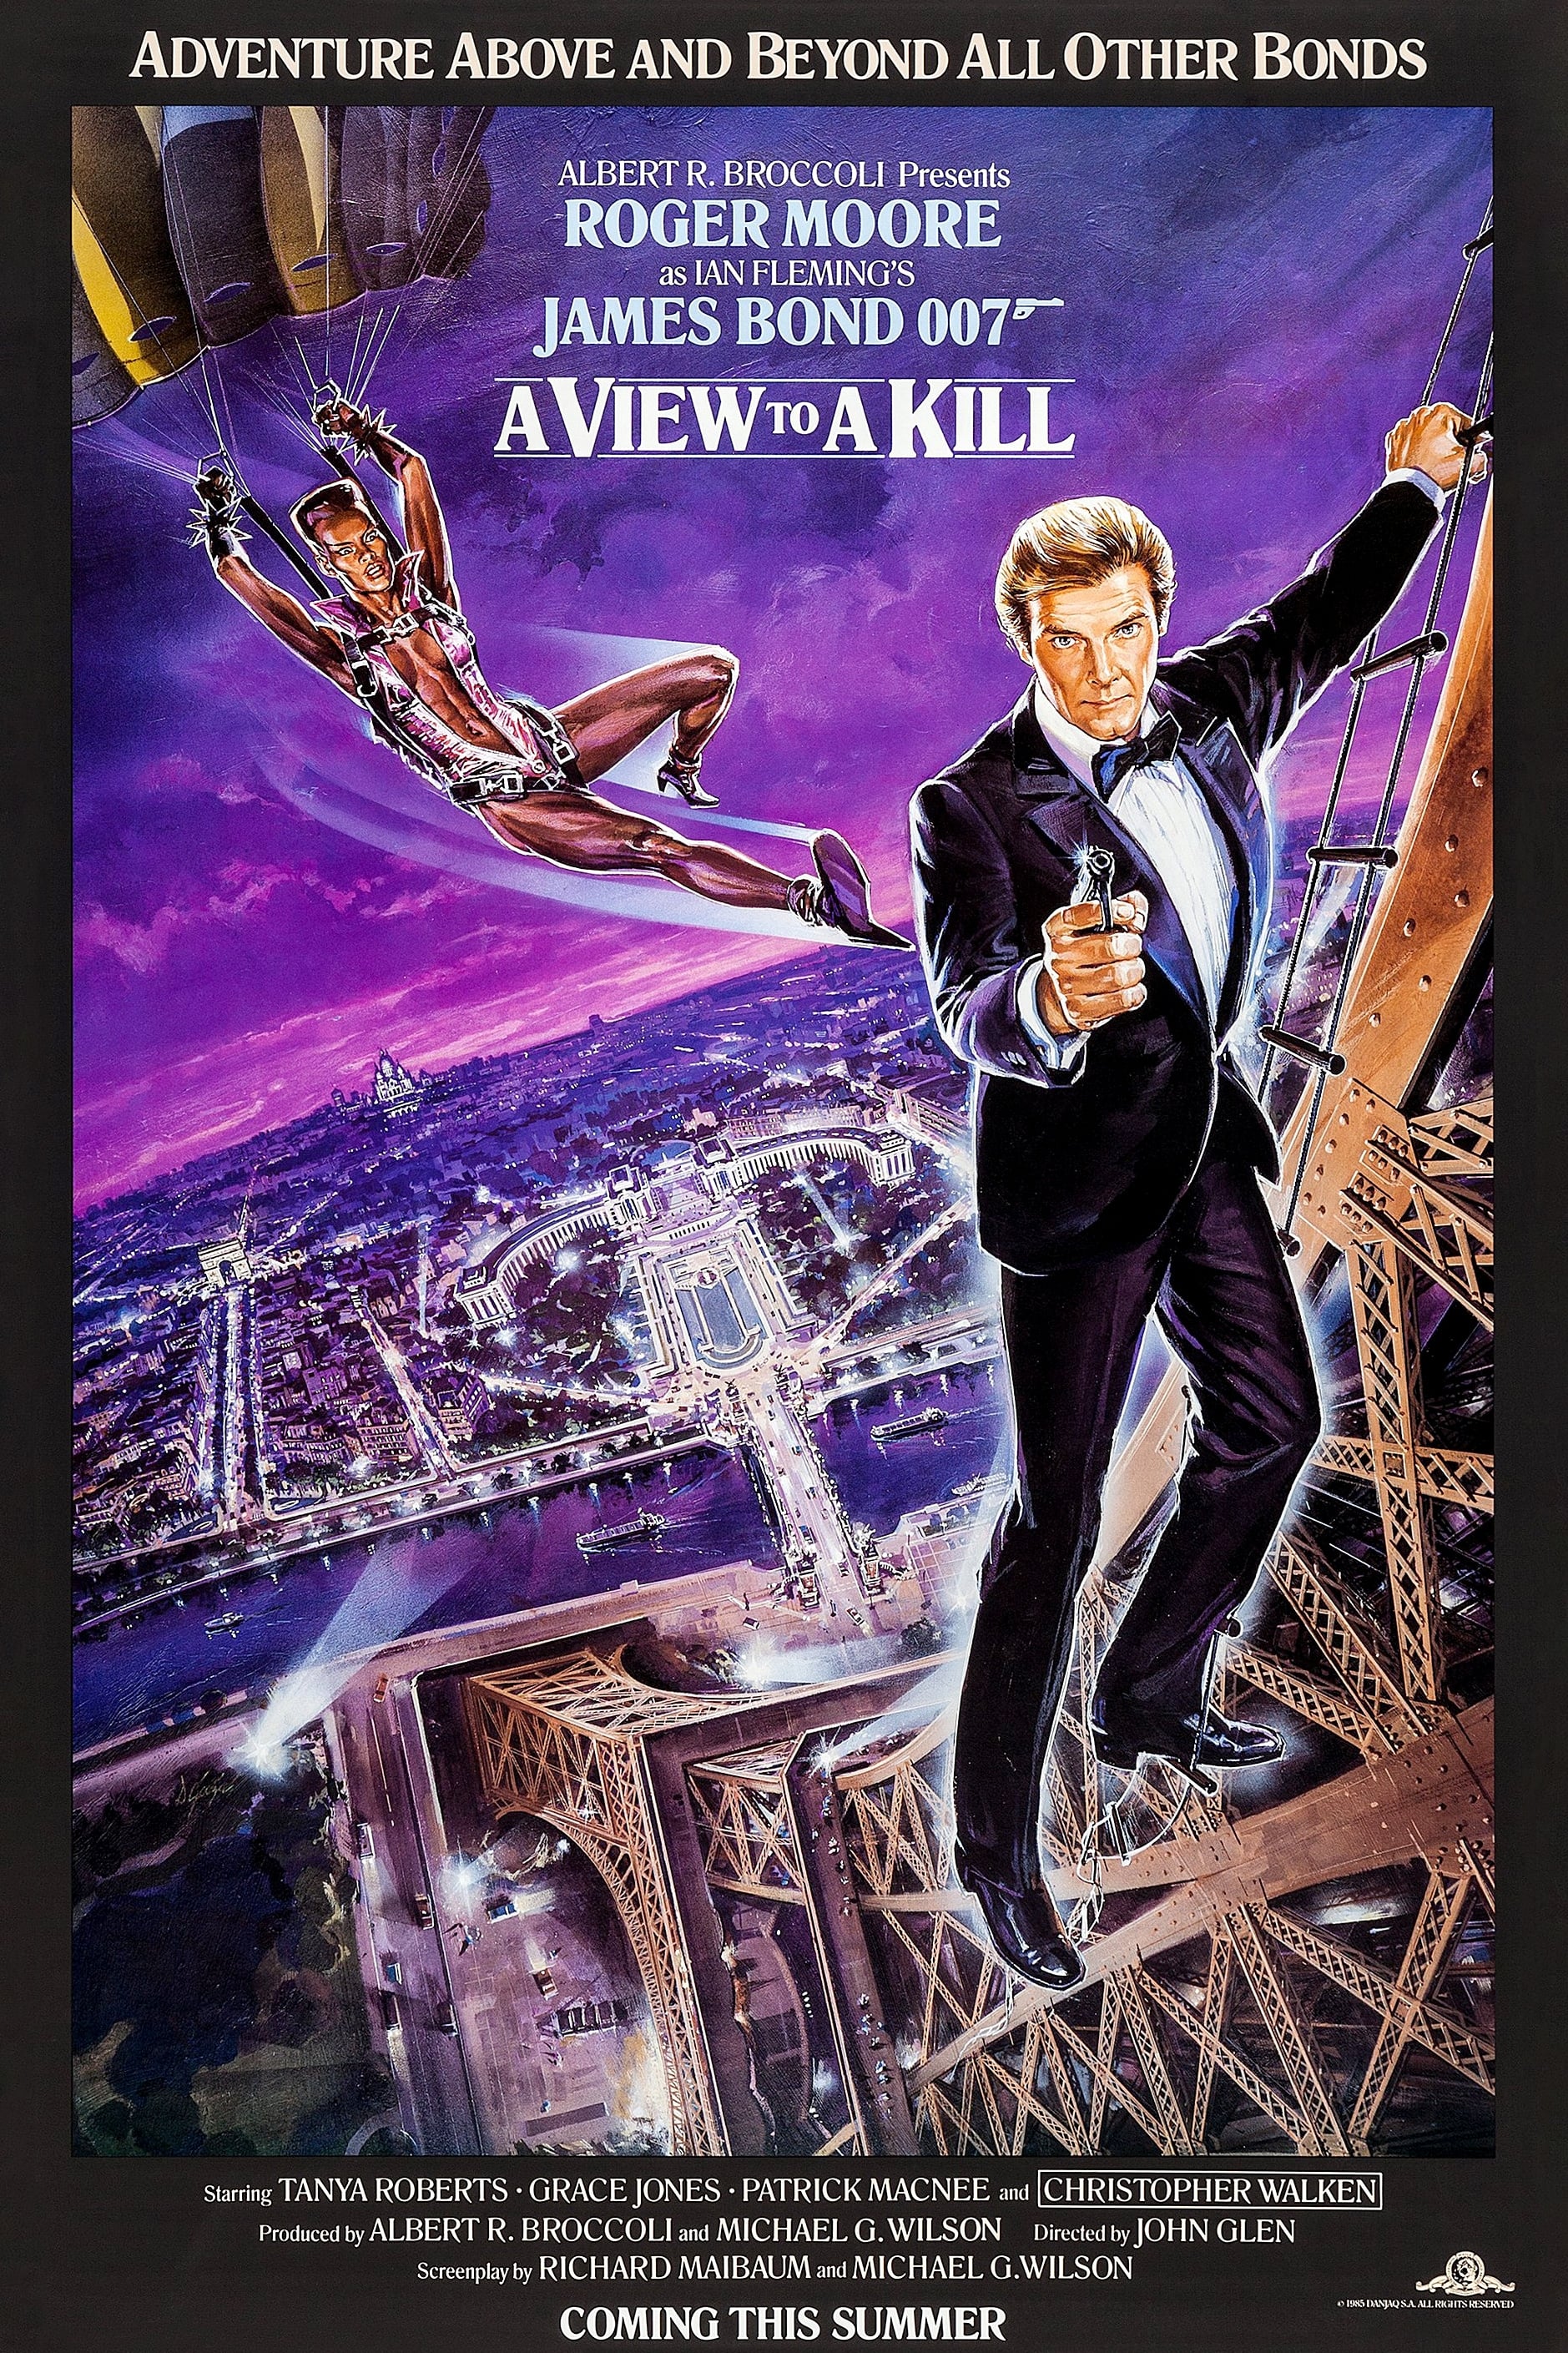 A View to a Kill POSTER